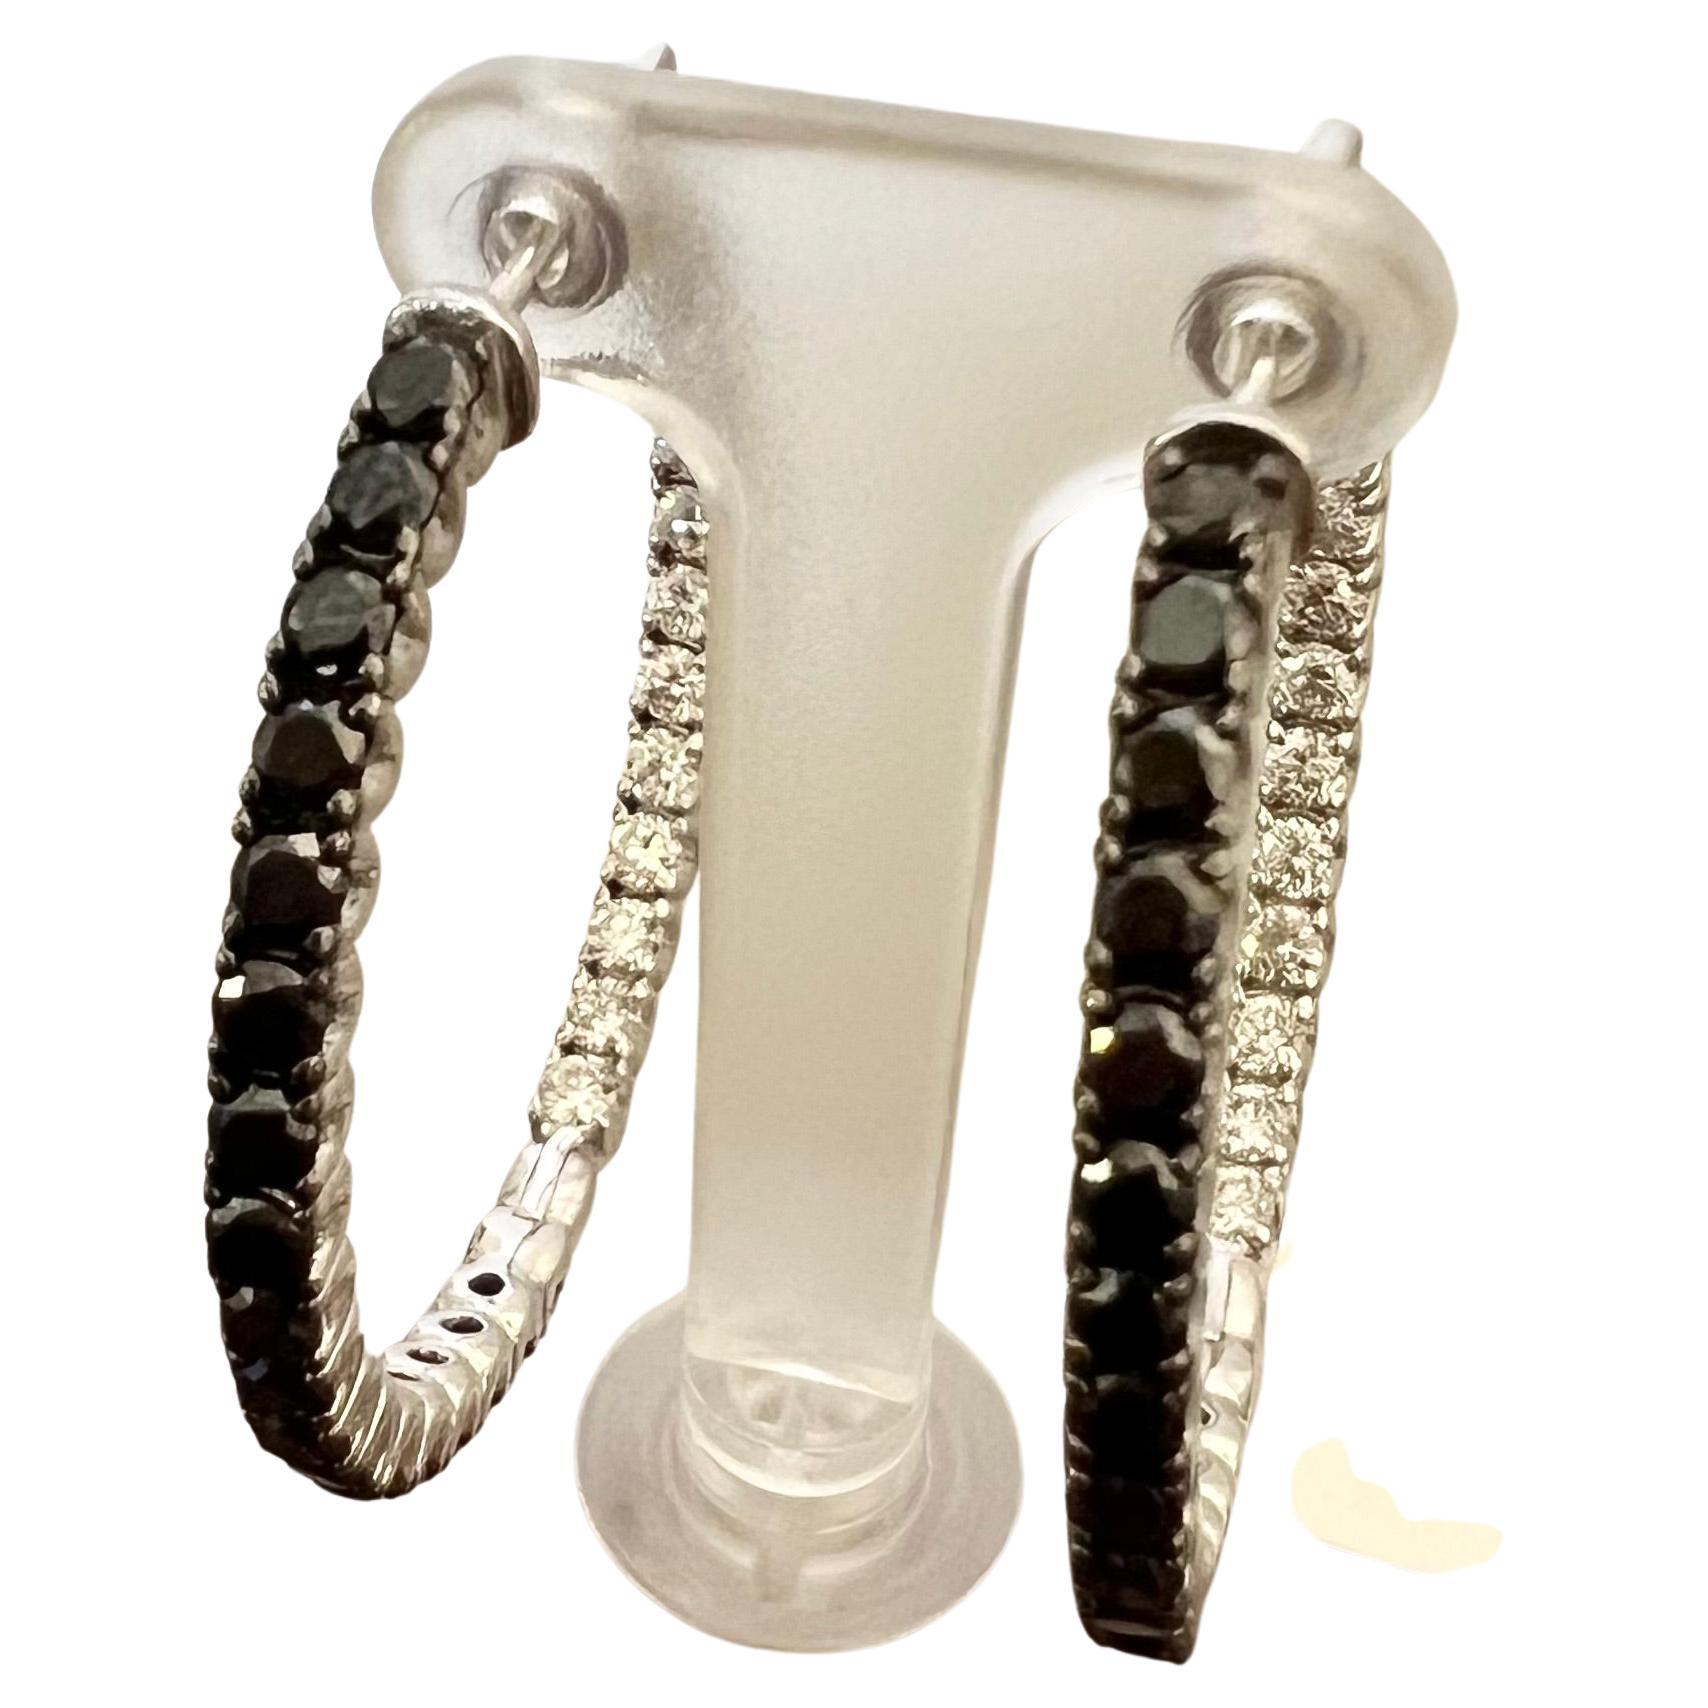 These gorgeous hoop earrings have 1.68 carats of Natural Round Cut Black Diamonds and 1.20 carats of Natural Round Cut White Diamonds. The total carat weight of the earrings are 2.88 carats. 

The hoop earrings measure at approximately 1.5 inches